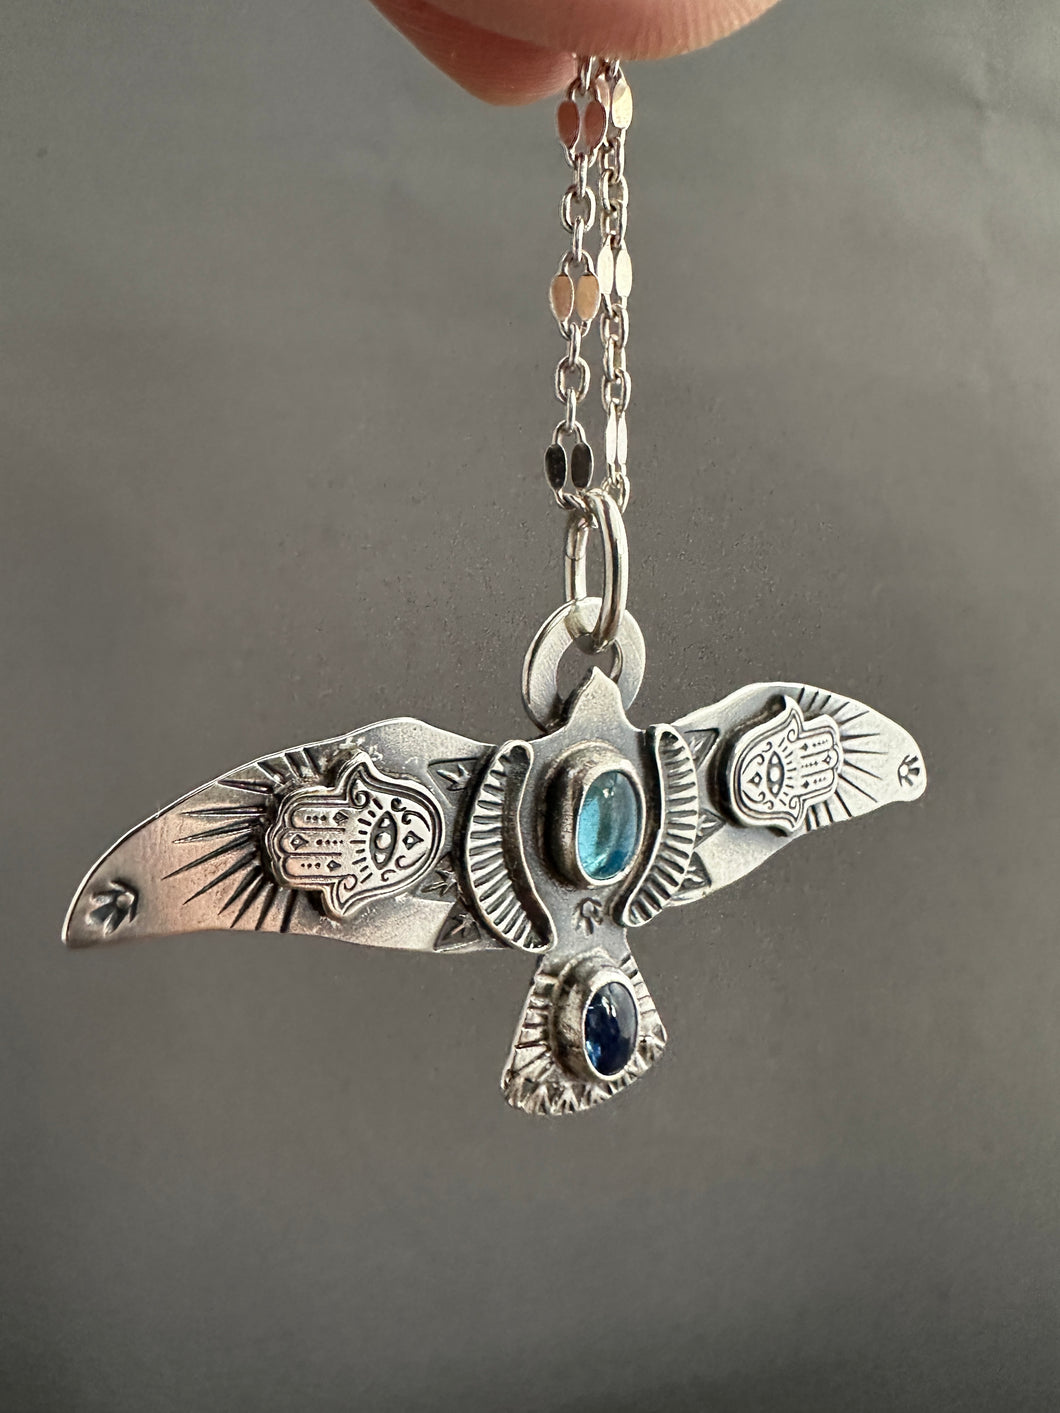 Large Blue Topaz and Kyanite stamped bird pendant